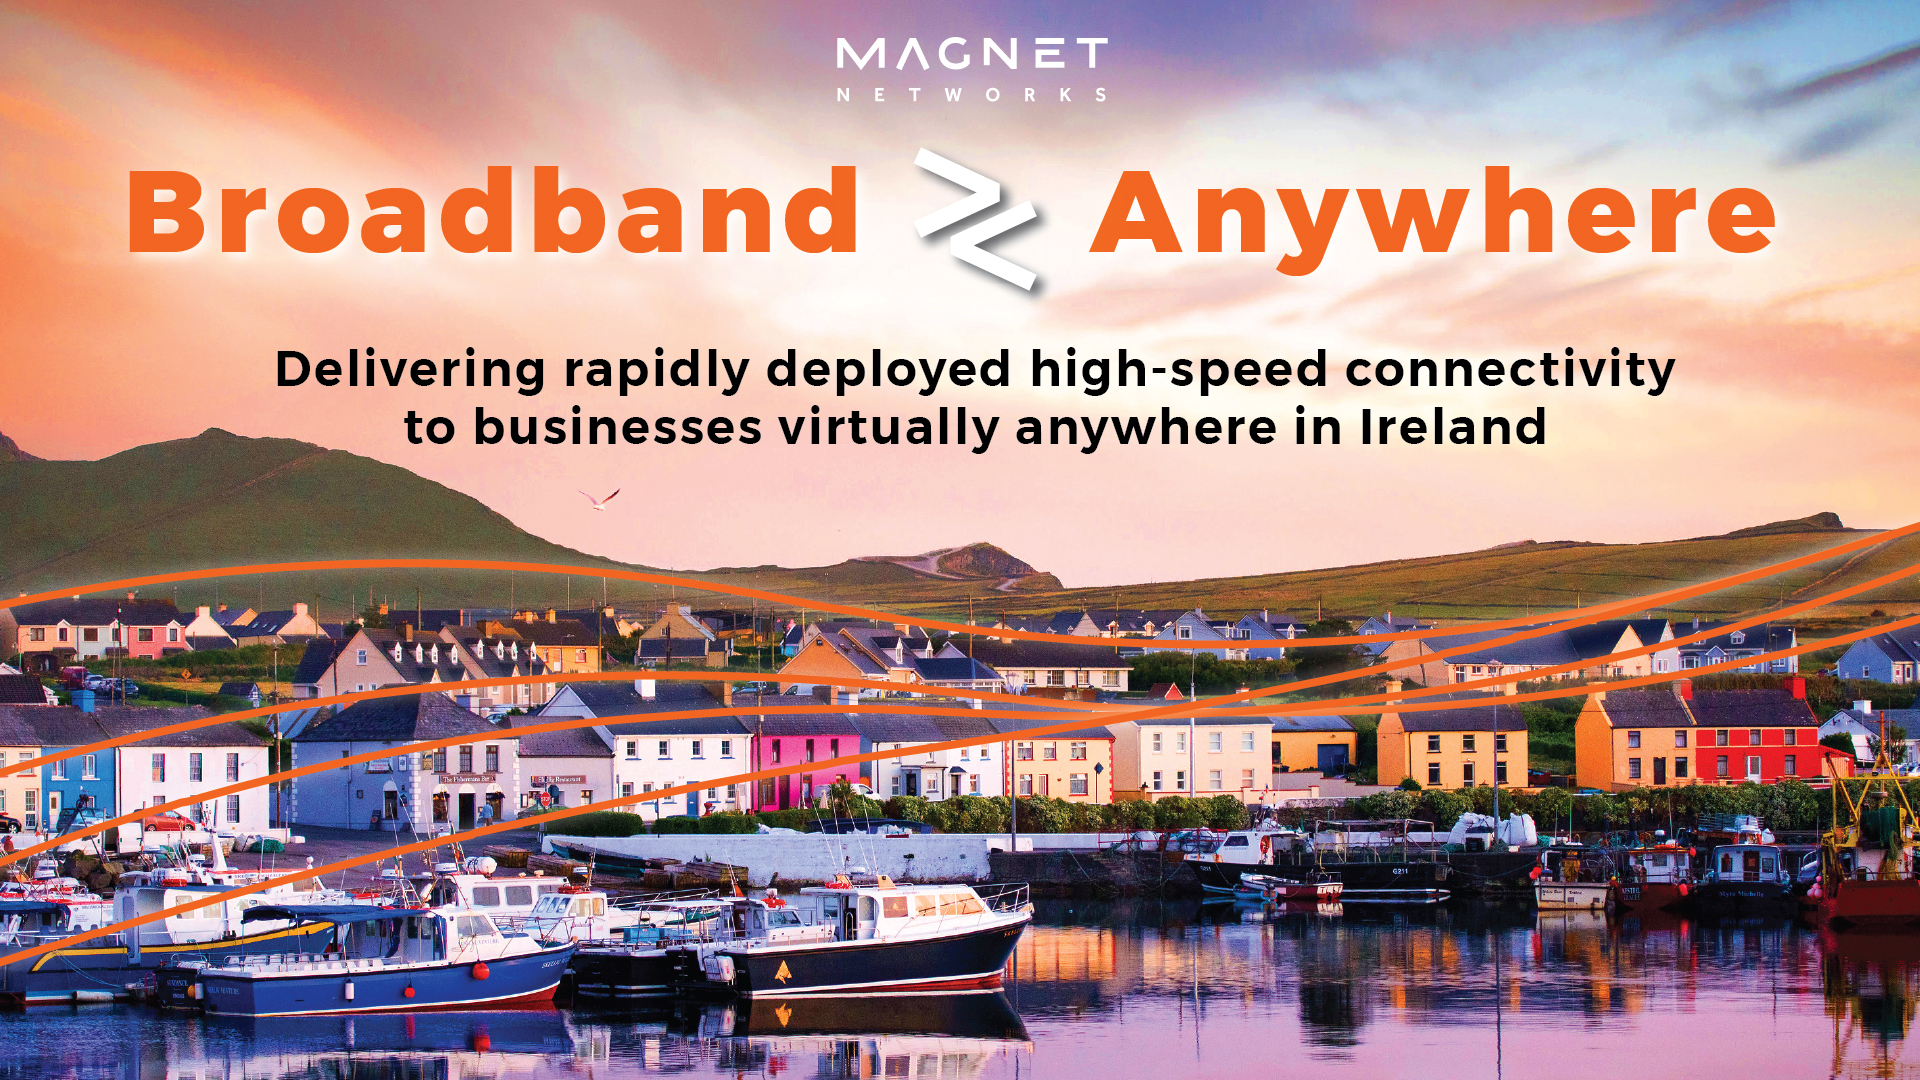 Broadband Anywhere - Delivering rapidly deployed high-speed connectivity to businesses virtually anywhere in Ireland